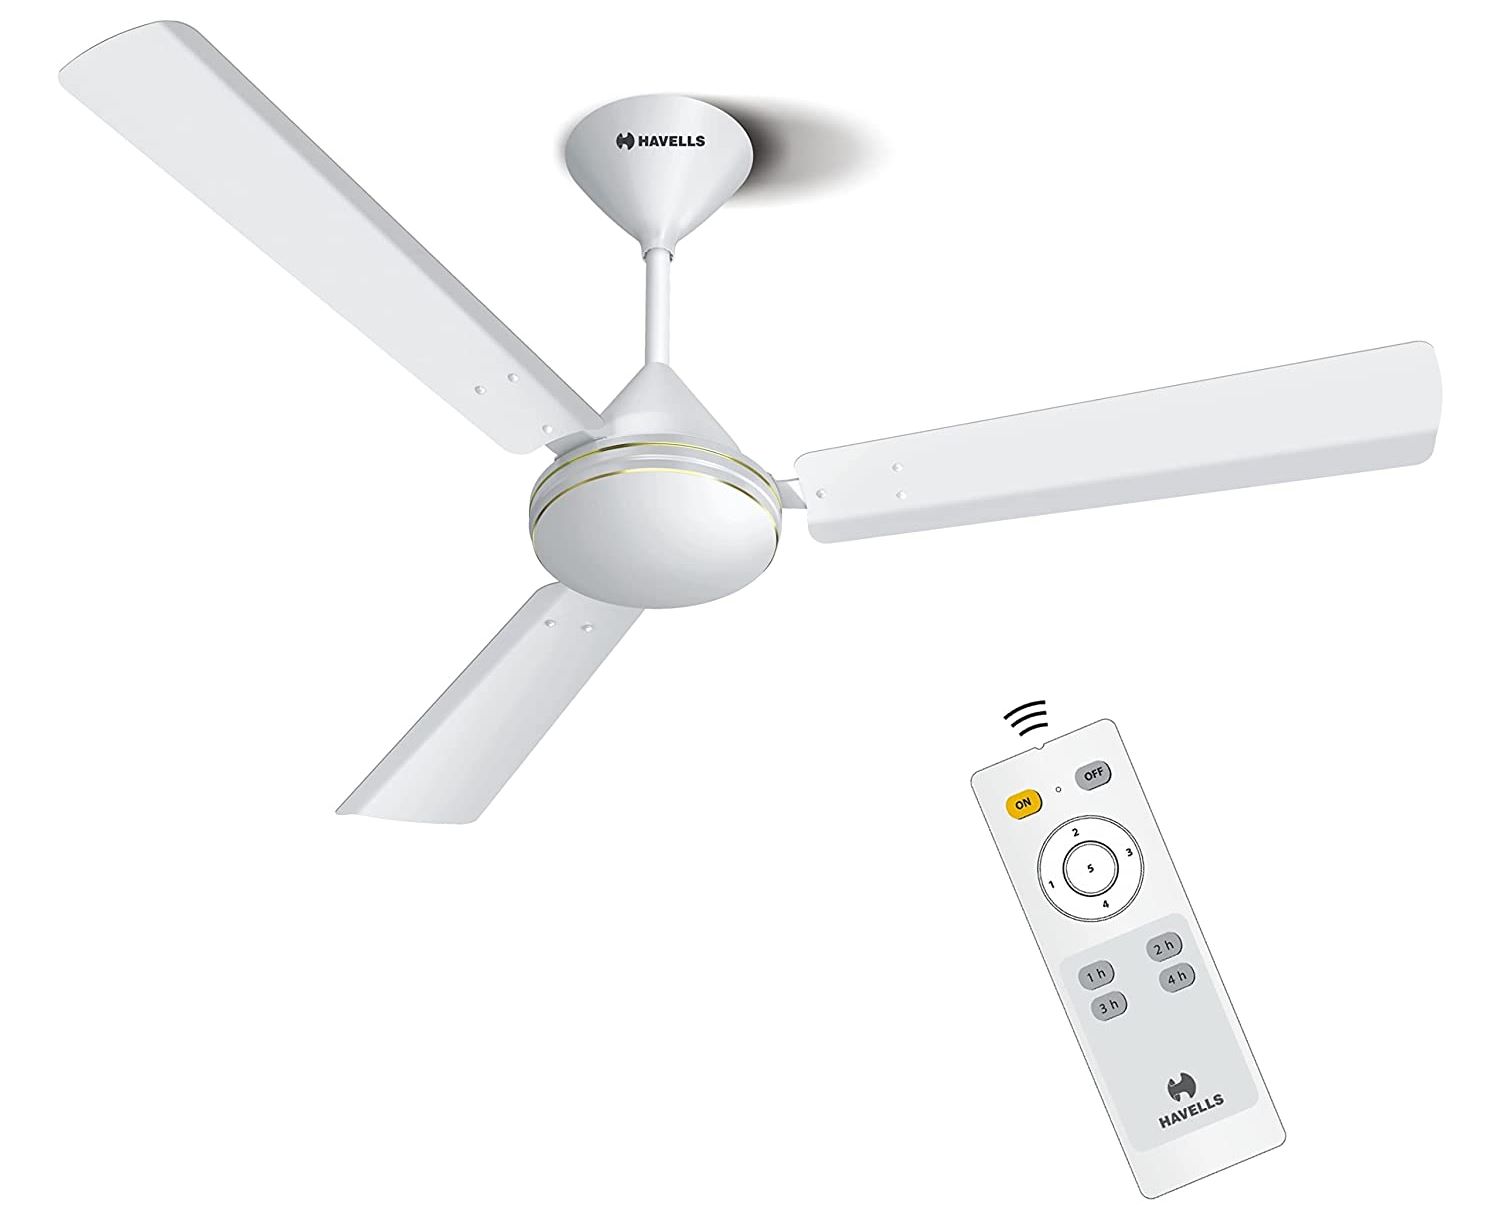 Havells 1200 mm Efficiencia Prime High Speed, BLDC Motor, Energy Efficient with Remote Control Ceiling Fan